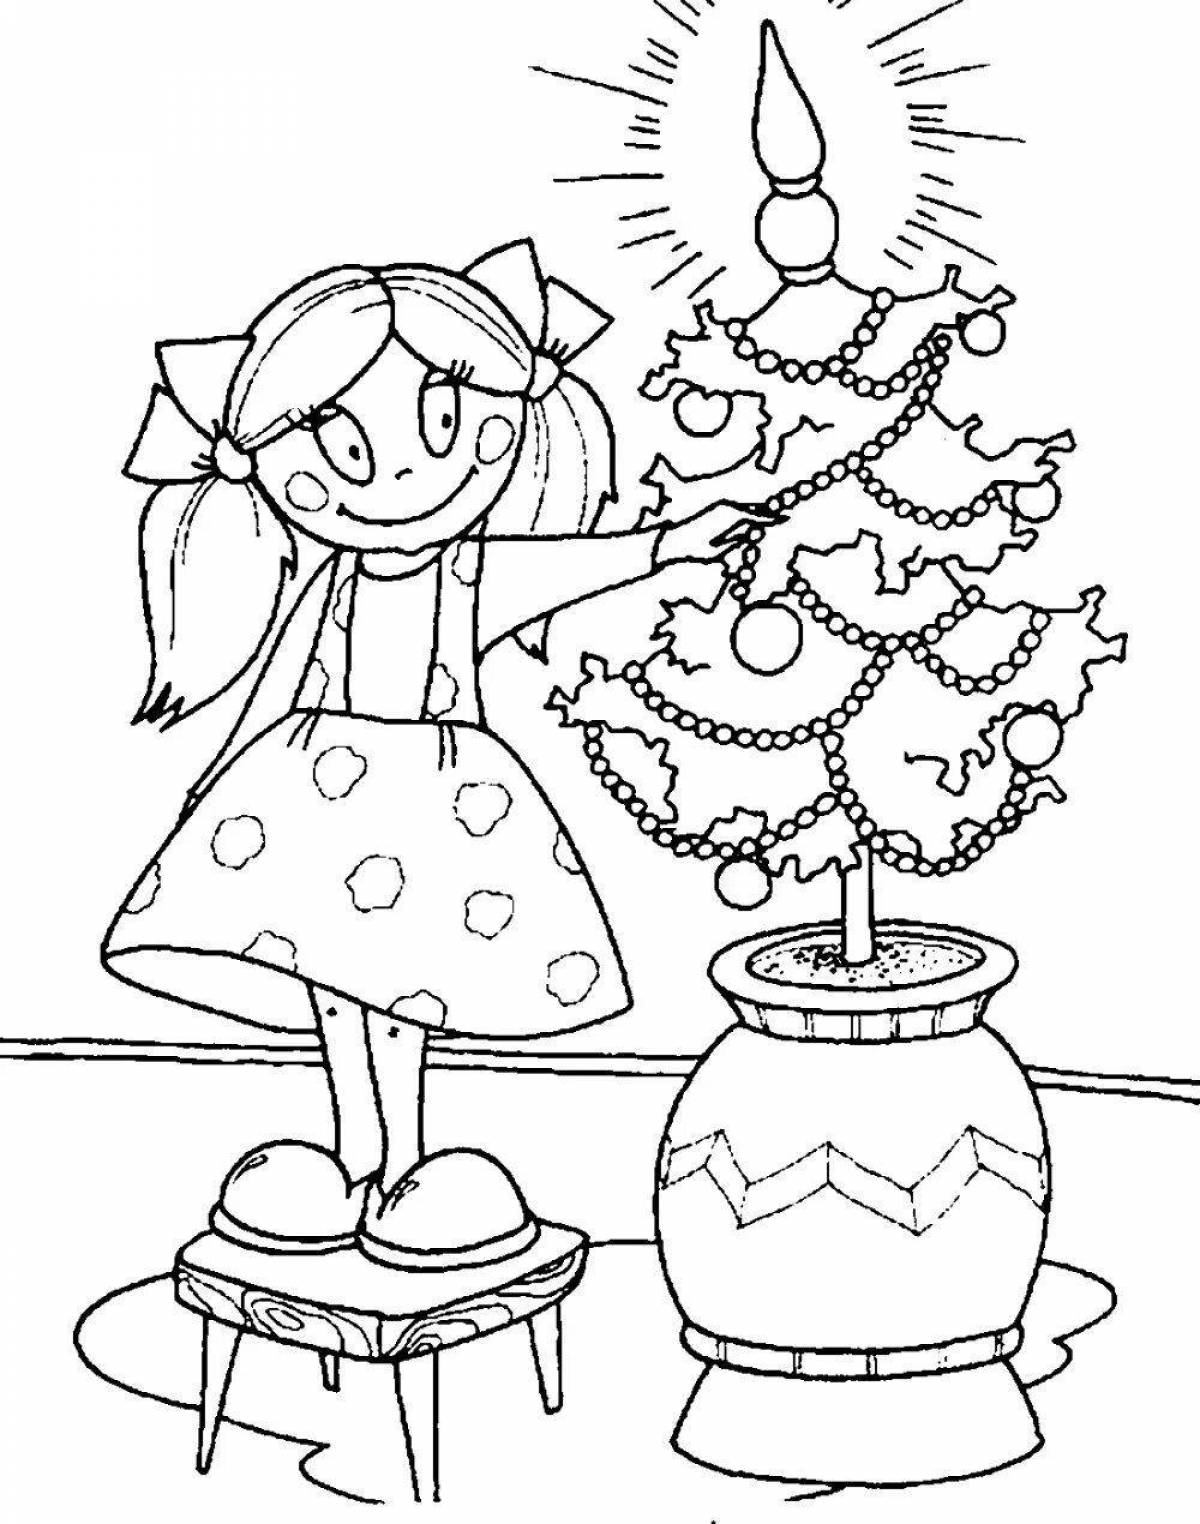 Amazing tree coloring book for girls